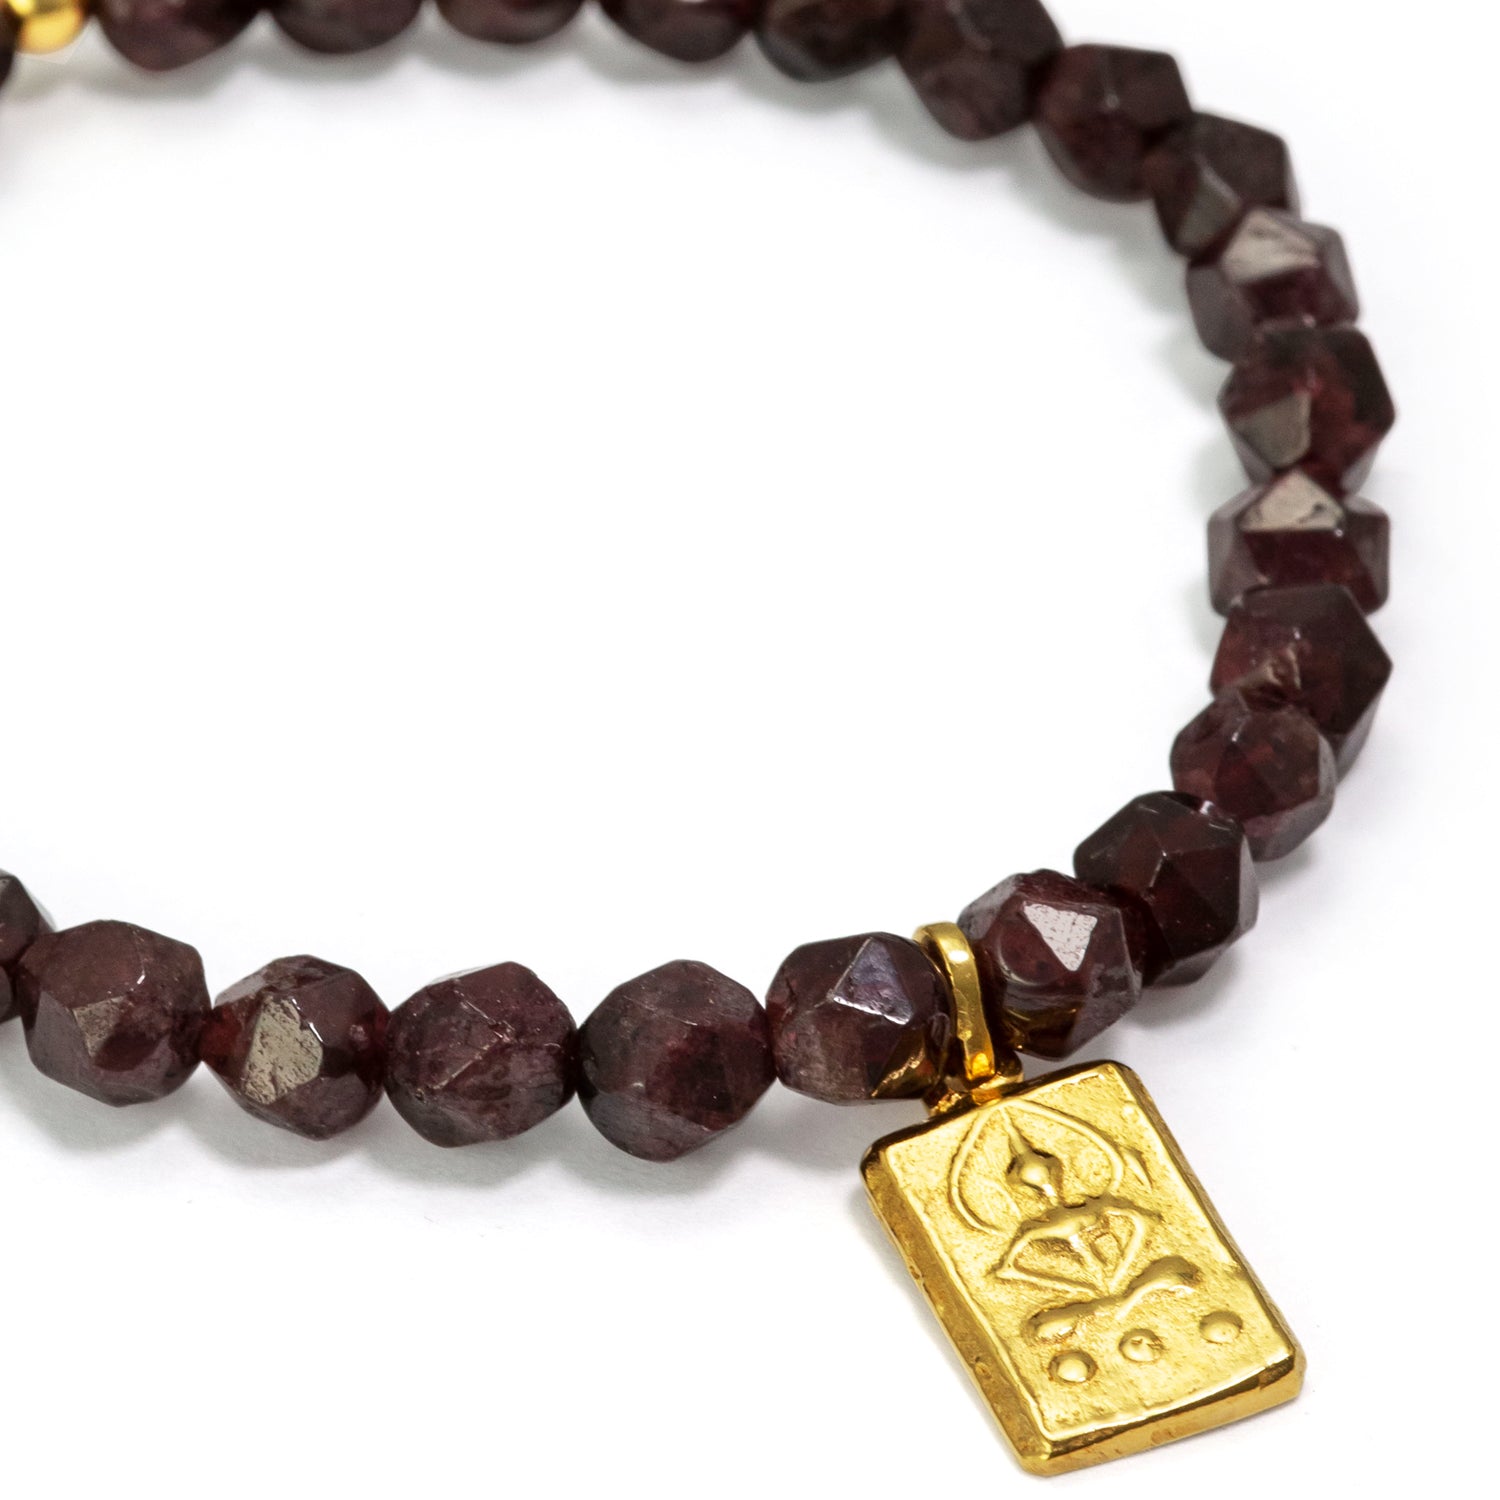 Buddha bracelet with irregularly cut garnet gemstones and gold-plated silver pendant from ETERNAL BLISS - Spiritual jewelry